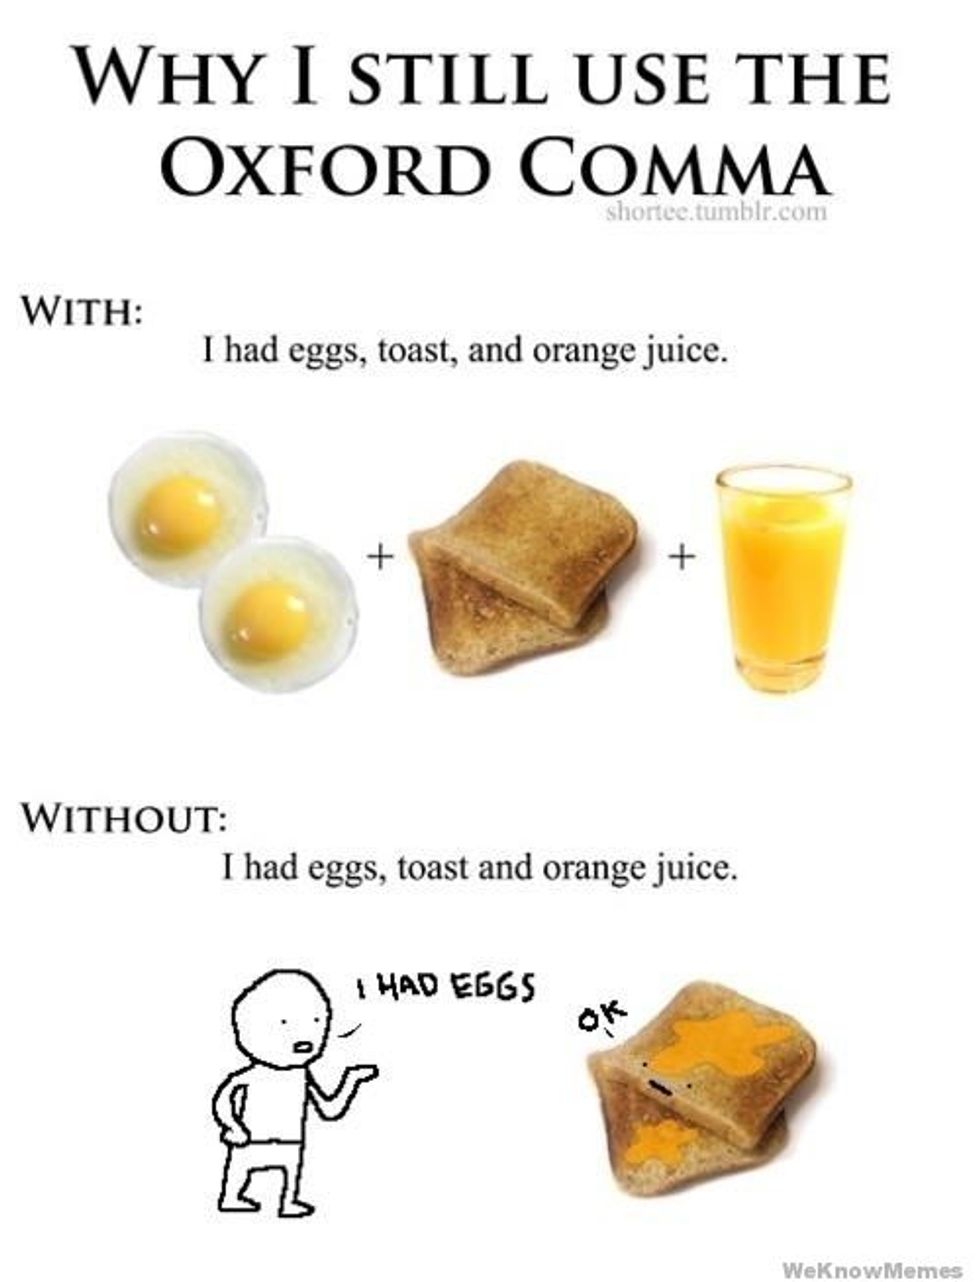 14 Reasons You Should Use The Oxford Comma 9294